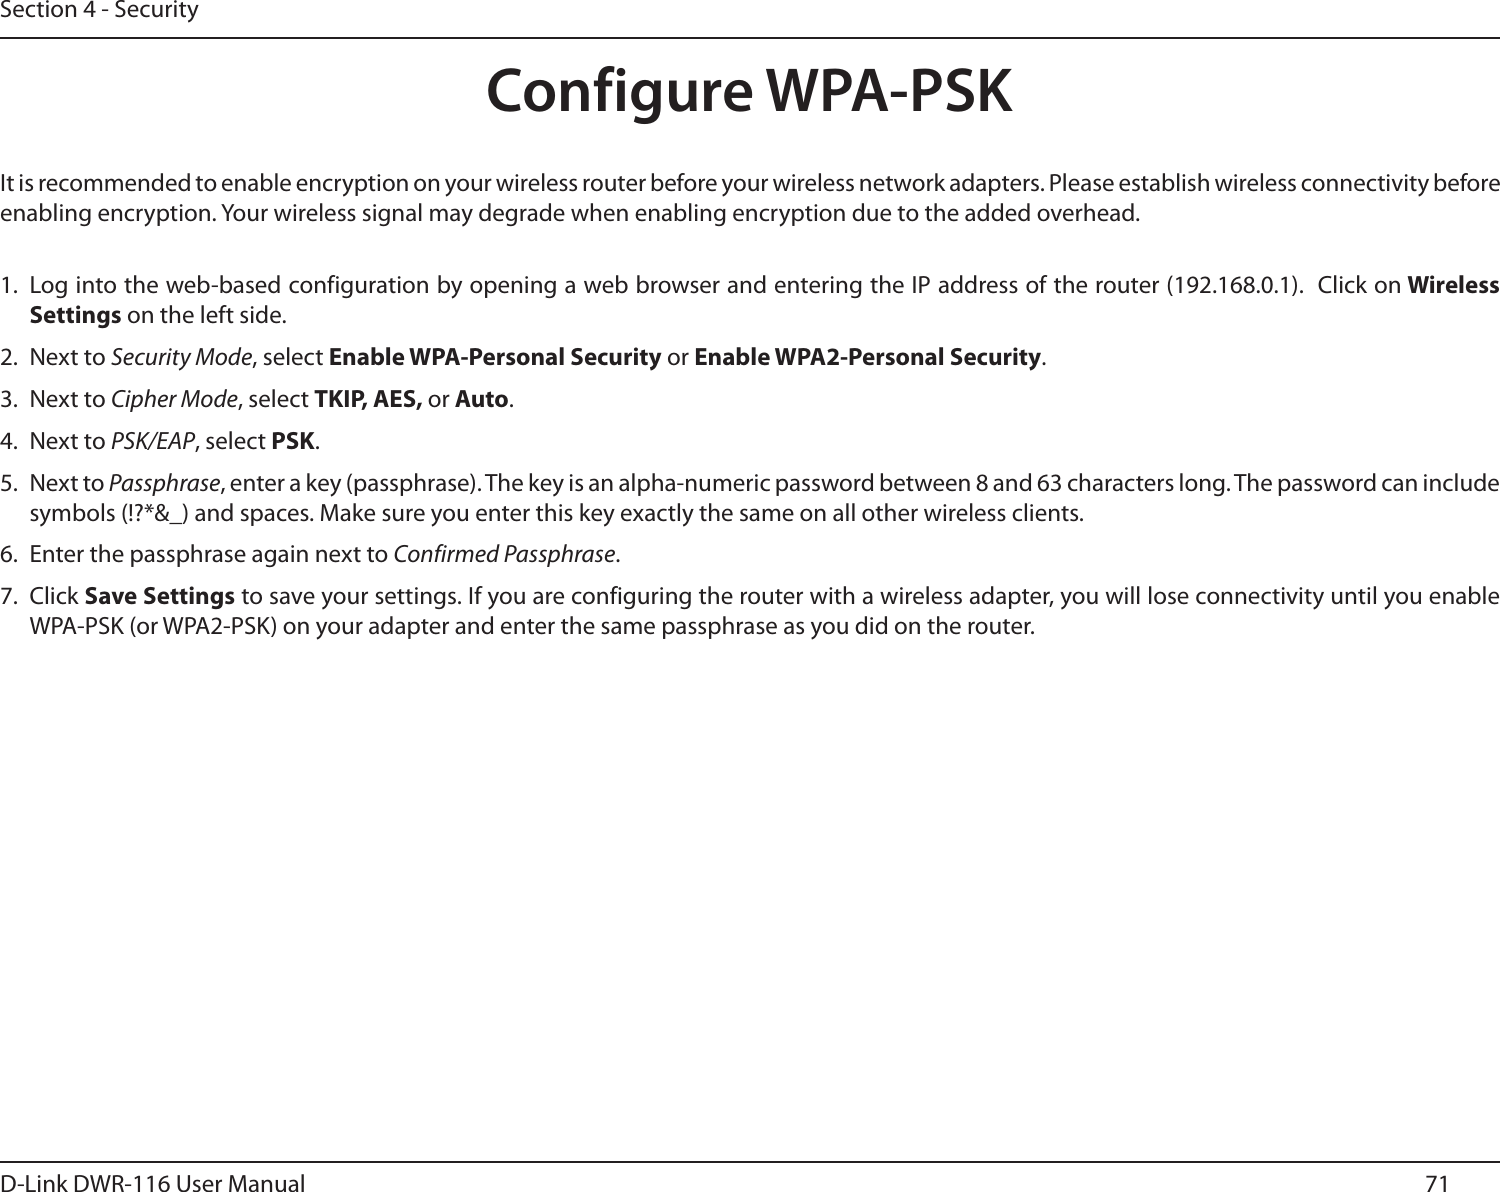 71D-Link DWR-116 User ManualSection 4 - SecurityConfigure WPA-PSKIt is recommended to enable encryption on your wireless router before your wireless network adapters. Please establish wireless connectivity before enabling encryption. Your wireless signal may degrade when enabling encryption due to the added overhead.1. Log into the web-based configuration by opening a web browser and entering the IP address of the router (192.168.0.1).  Click on Wireless Settings on the left side.2.  Next to Security Mode, select Enable WPA-Personal Security or Enable WPA2-Personal Security.3.  Next to Cipher Mode, select TKIP, AES, or Auto.4.  Next to PSK/EAP, select PSK.5.  Next to Passphrase, enter a key (passphrase). The key is an alpha-numeric password between 8 and 63 characters long. The password can include symbols (!?*&amp;_) and spaces. Make sure you enter this key exactly the same on all other wireless clients.6.  Enter the passphrase again next to Confirmed Passphrase.7.  Click Save Settings to save your settings. If you are configuring the router with a wireless adapter, you will lose connectivity until you enable WPA-PSK (or WPA2-PSK) on your adapter and enter the same passphrase as you did on the router.